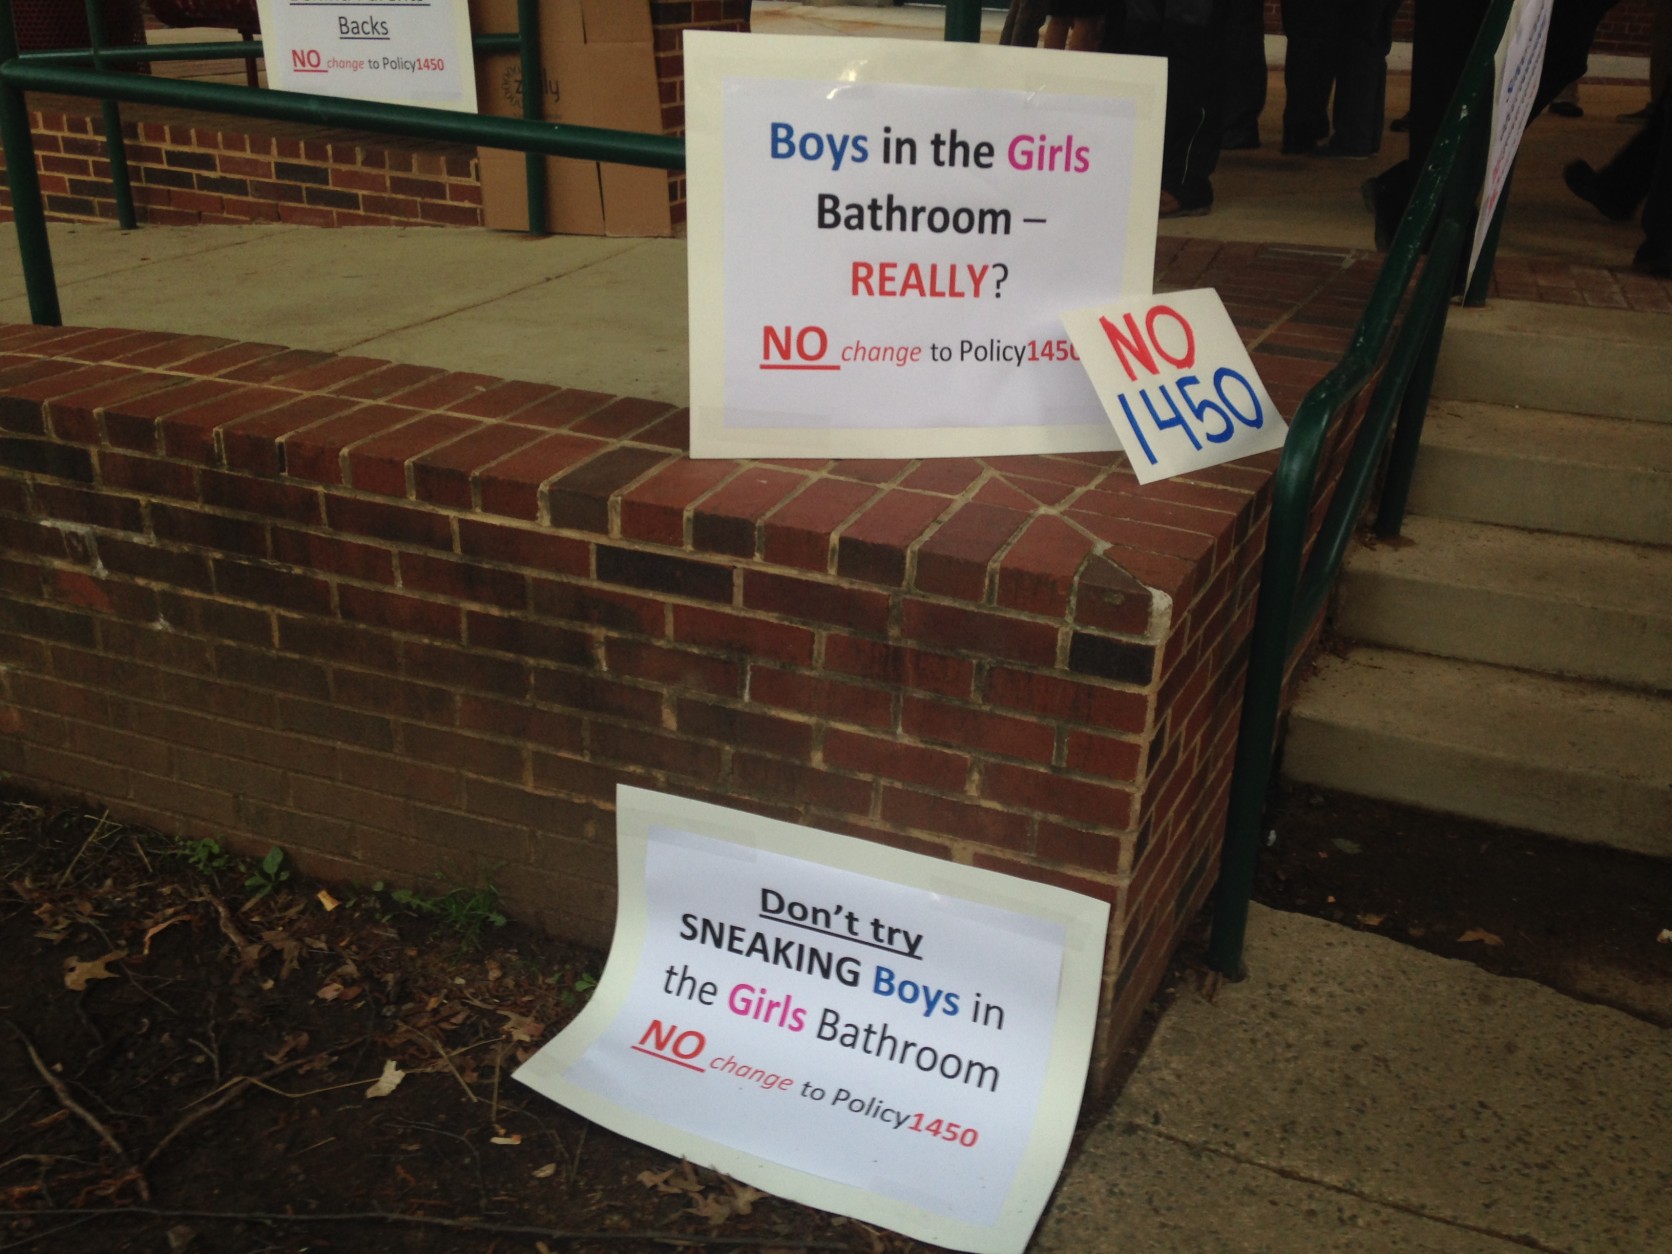 Signs seen outside the Fairfax County School Board meeting Thursday, May 7, 2015. (WTOP/Michelle Basch)